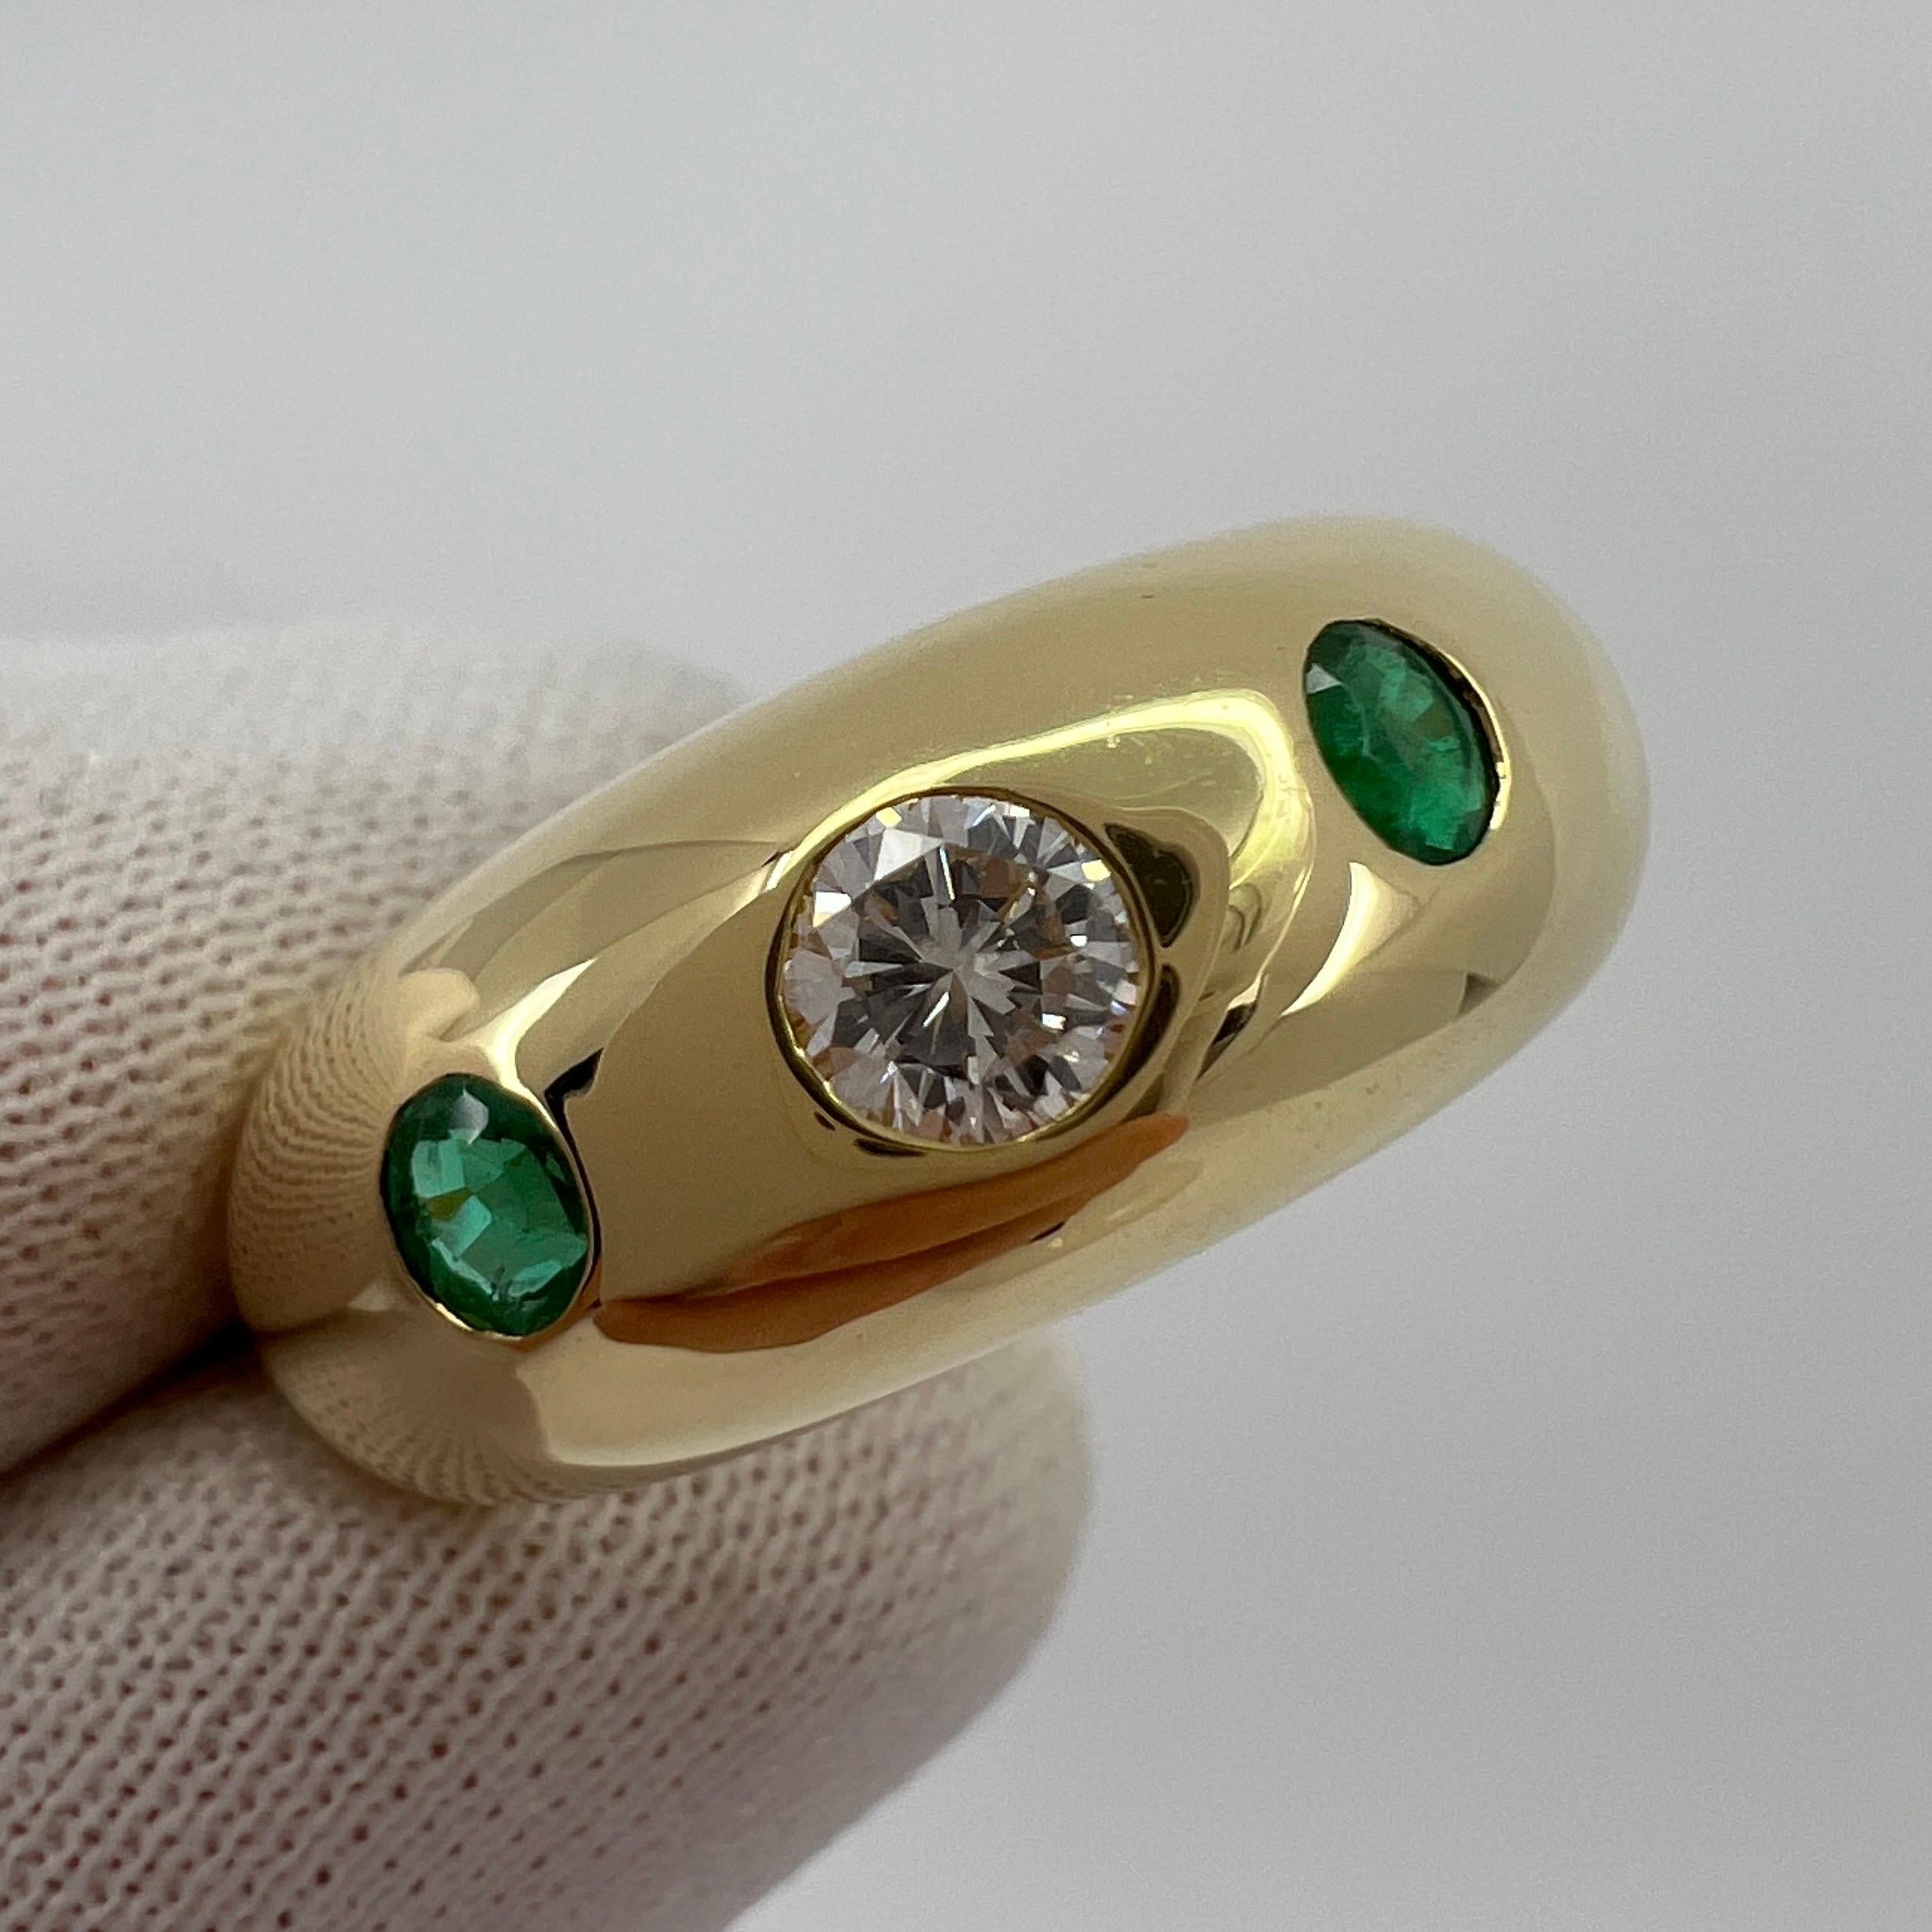 Vintage Cartier Diamond & Emerald 18k Yellow Gold Three Stone Gypsy Ring.

Stunning yellow gold Cartier ring set with a beautiful 3.5mm centre diamond with F/G Colour and VVS clarity. This is accented by 2 fine green emeralds approx 2.5mm each.
Fine